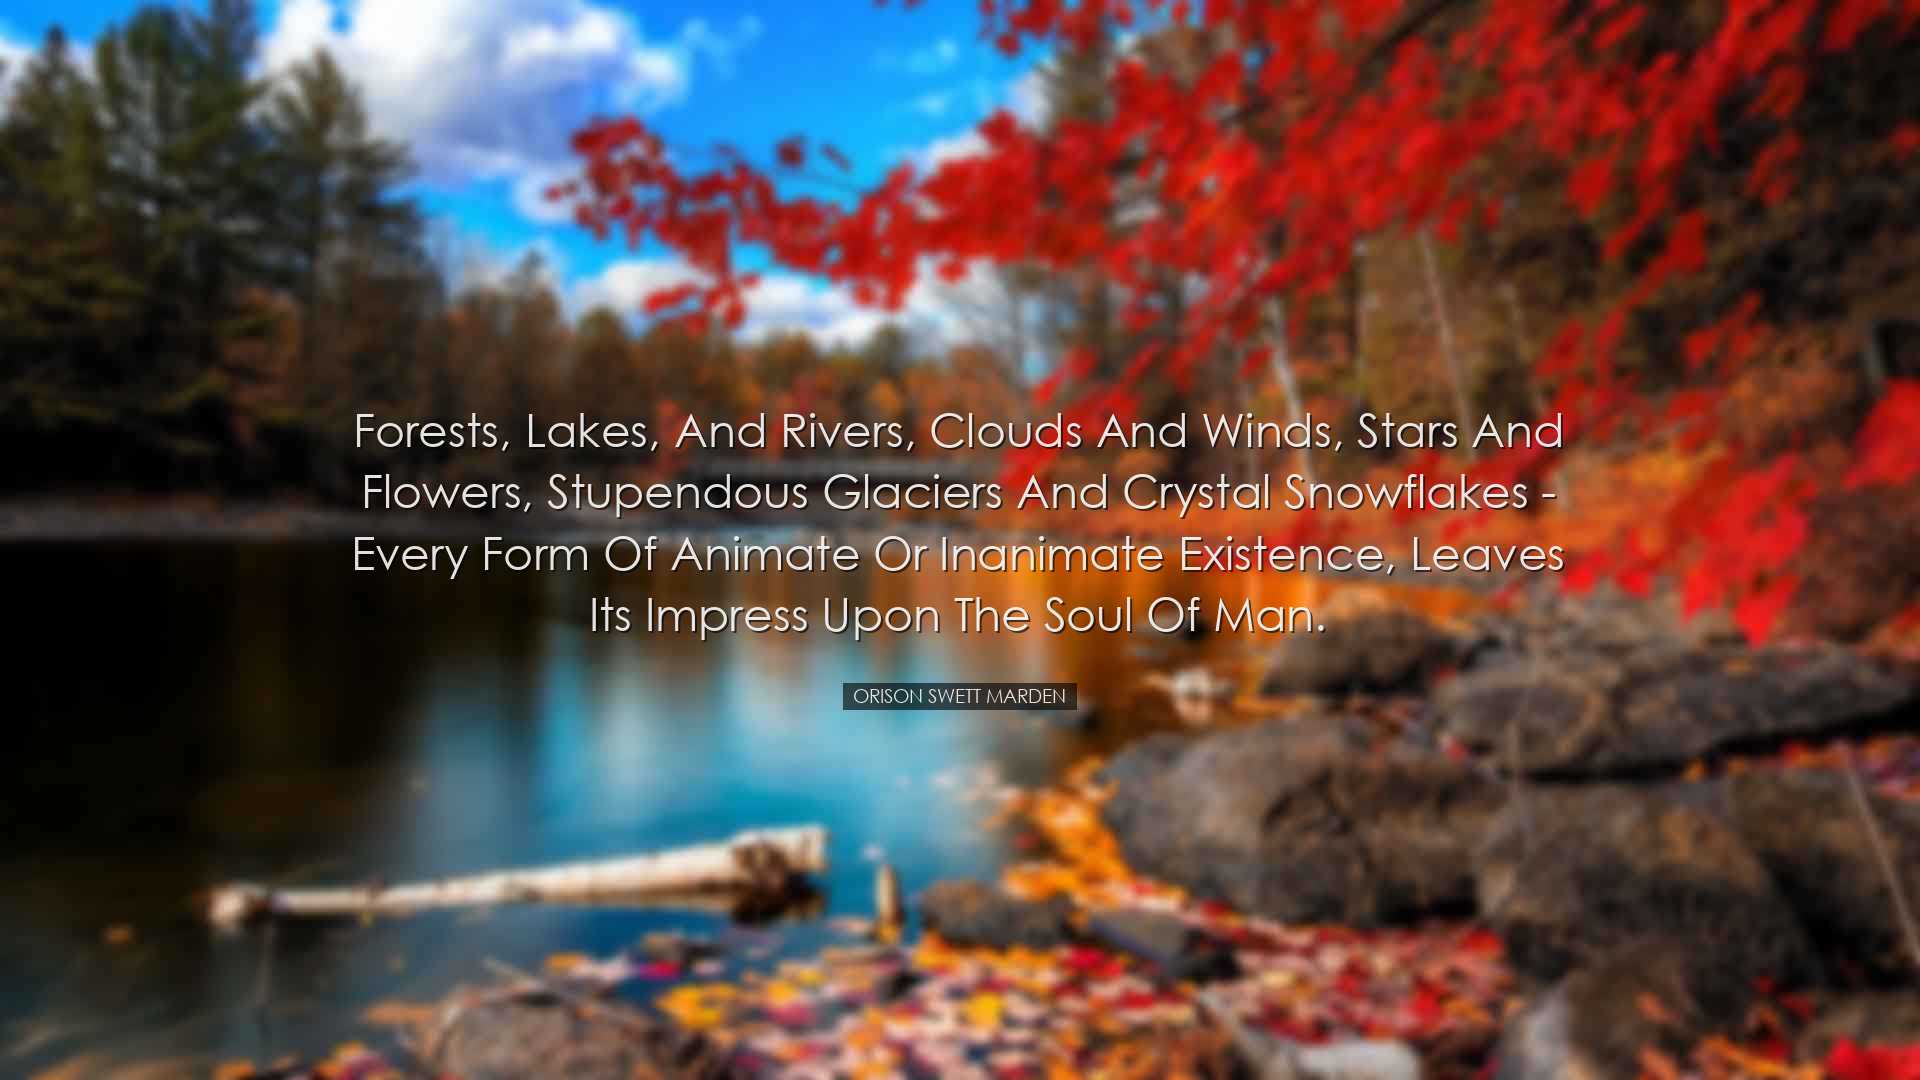 Forests, lakes, and rivers, clouds and winds, stars and flowers, s